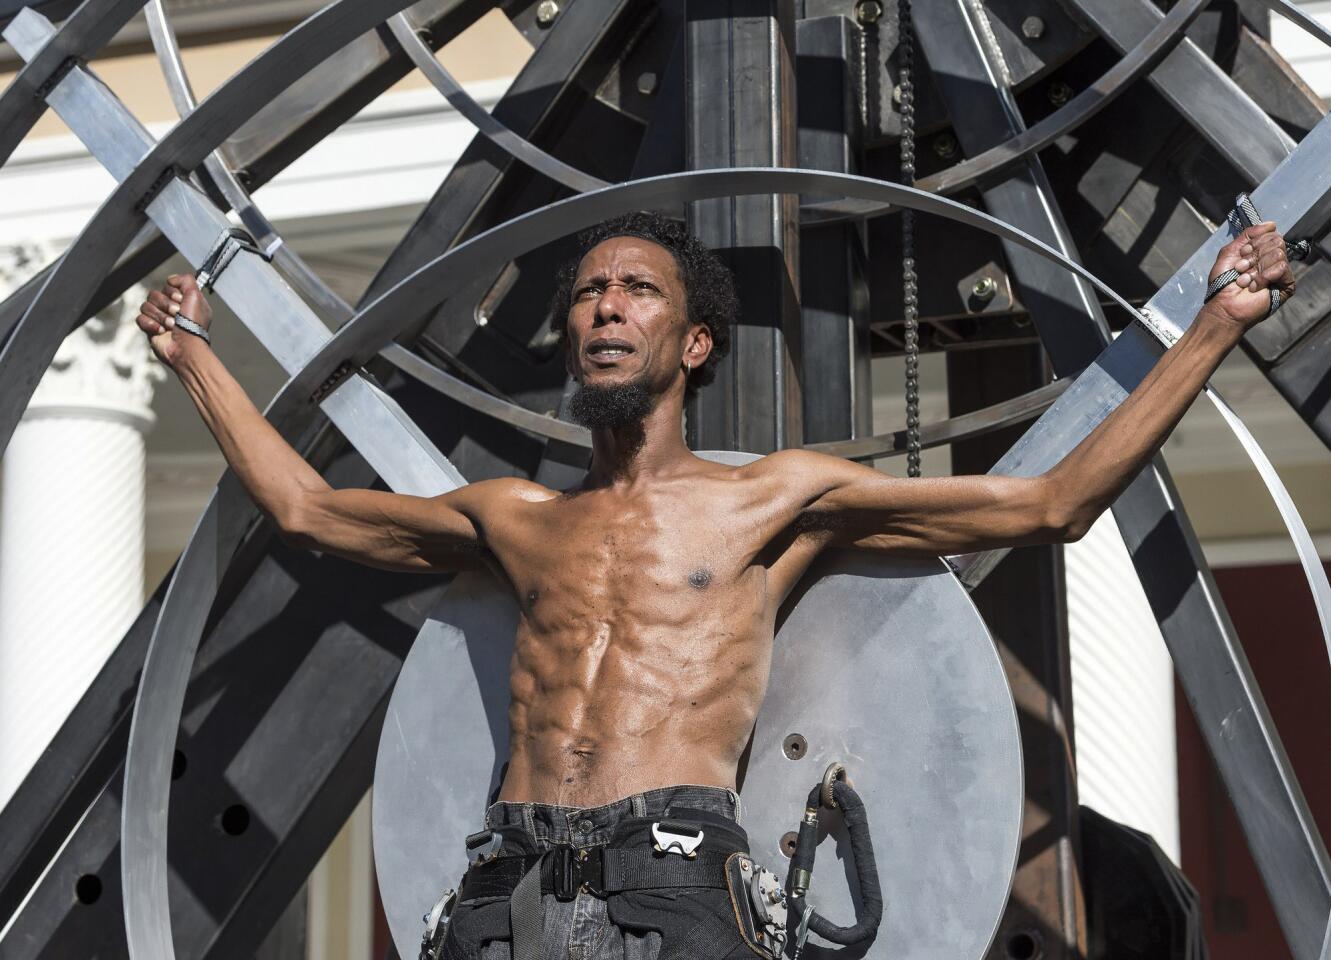 A giant rotating steel wheel dominated the Getty Villa's "Prometheus Bound," but Ron Cephas Jones conveyed the anguish and defiance.